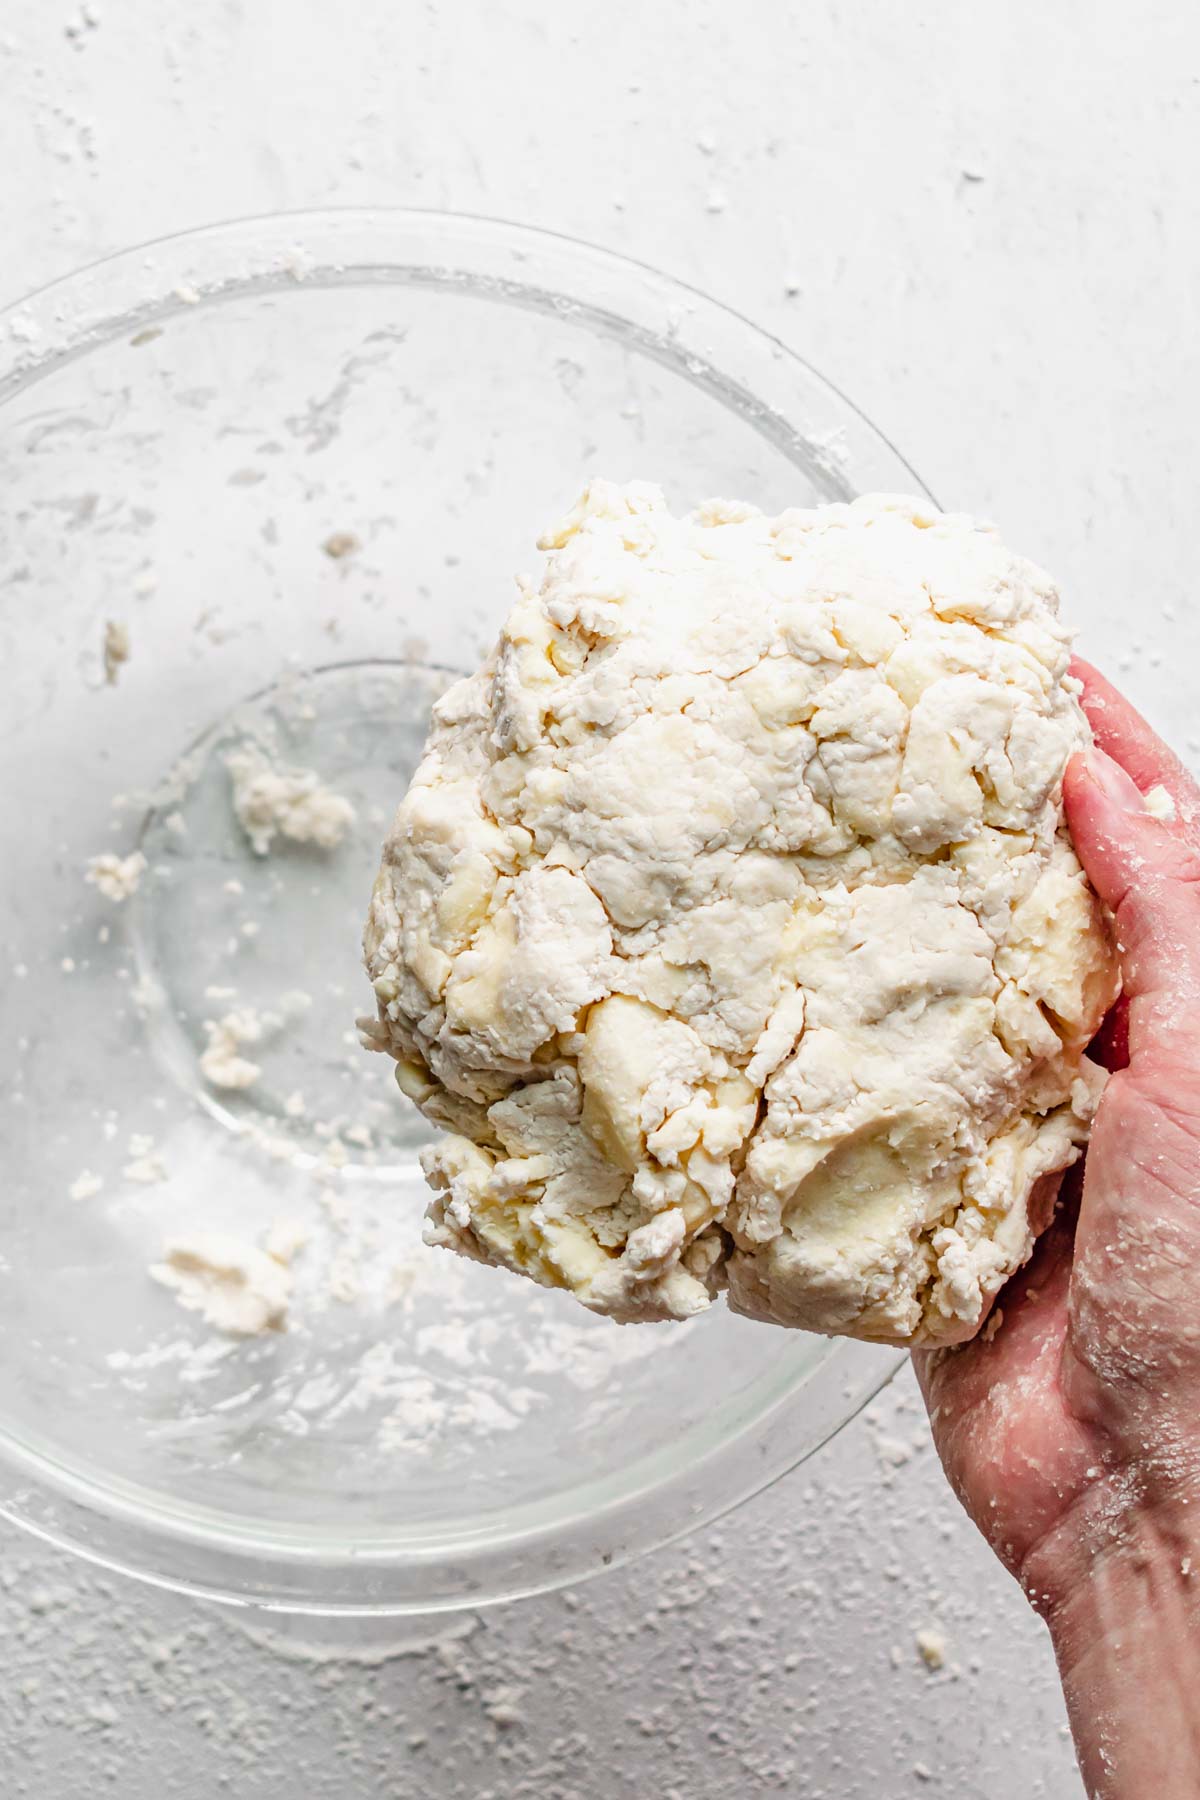 A hand holds the dough in a form.